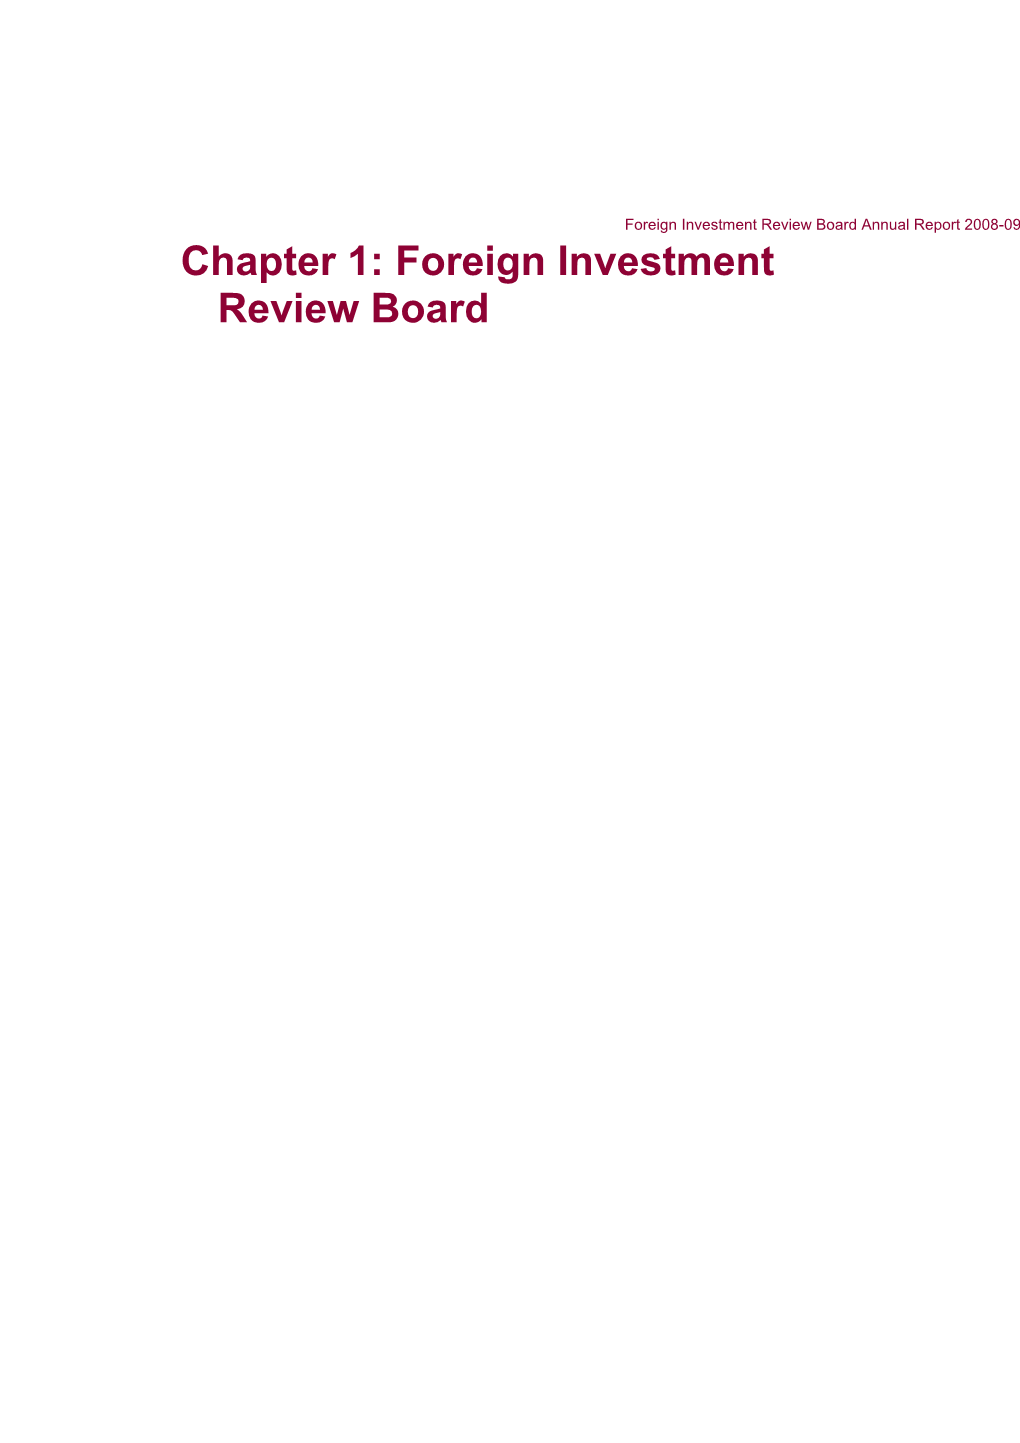 Foreign Investment Review Board Annual Report 2012-13